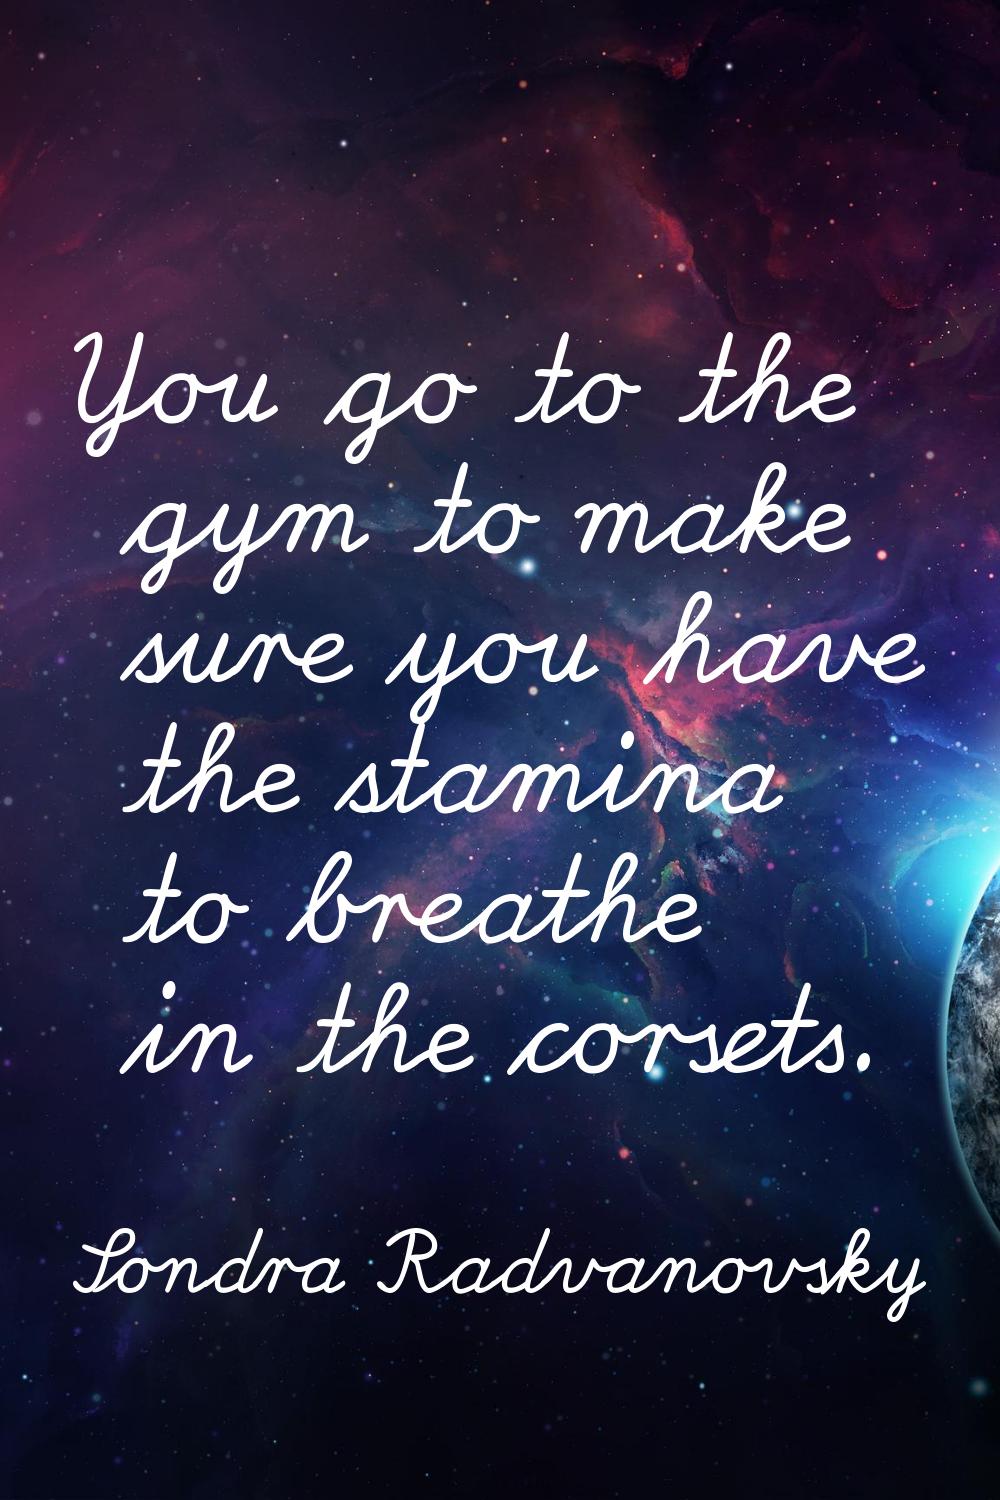 You go to the gym to make sure you have the stamina to breathe in the corsets.